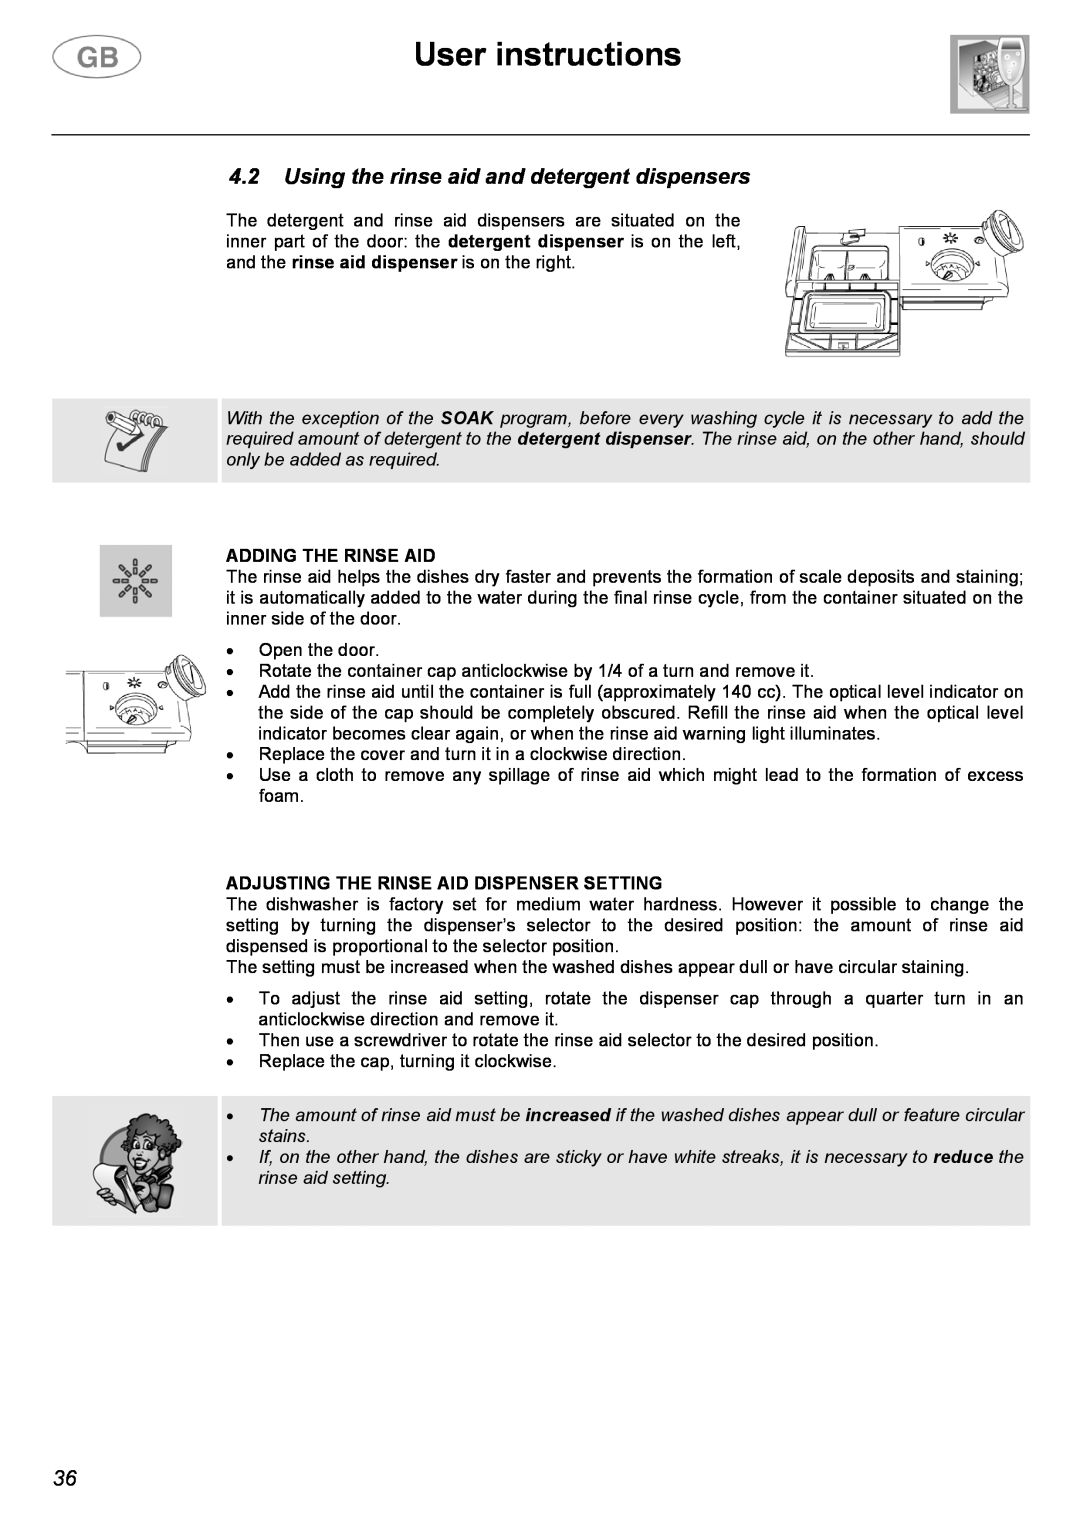 Smeg EL05 instruction manual User instructions, 4.2Using the rinse aid and detergent dispensers, Adding The Rinse Aid 